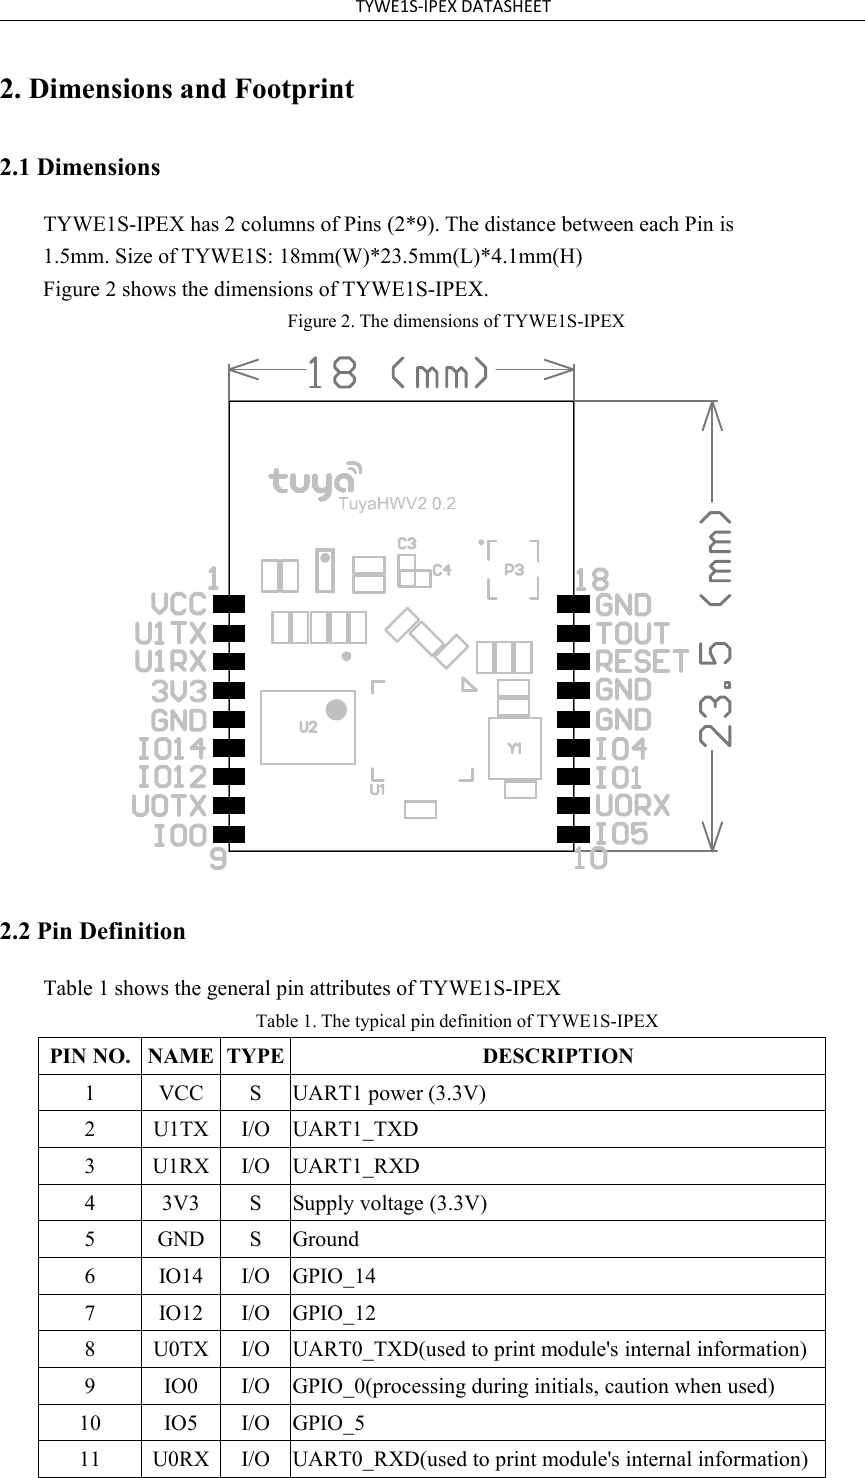 TYWE1S-IPEX DATASHEET2. Dimensions and Footprint2.1 DimensionsTYWE1S-IPEX has 2 columns of Pins (2*9). The distance between each Pin is 1.5mm. Size of TYWE1S: 18mm(W)*23.5mm(L)*4.1mm(H)Figure 2 shows the dimensions of TYWE1S-IPEX.Figure 2. The dimensions of TYWE1S-IPEX2.2 Pin DefinitionTable 1 shows the general pin attributes of TYWE1S-IPEXTable 1. The typical pin definition of TYWE1S-IPEXPIN NO.NAMETYPEDESCRIPTION1VCCSUART1 power (3.3V)2U1TXI/OUART1_TXD3U1RXI/OUART1_RXD43V3SSupply voltage (3.3V)5GNDSGround6IO14I/OGPIO_147IO12I/OGPIO_128U0TXI/OUART0_TXD(used to print module&apos;s internal information)9IO0I/OGPIO_0(processing during initials, caution when used)10IO5I/OGPIO_511U0RXI/OUART0_RXD(used to print module&apos;s internal information)